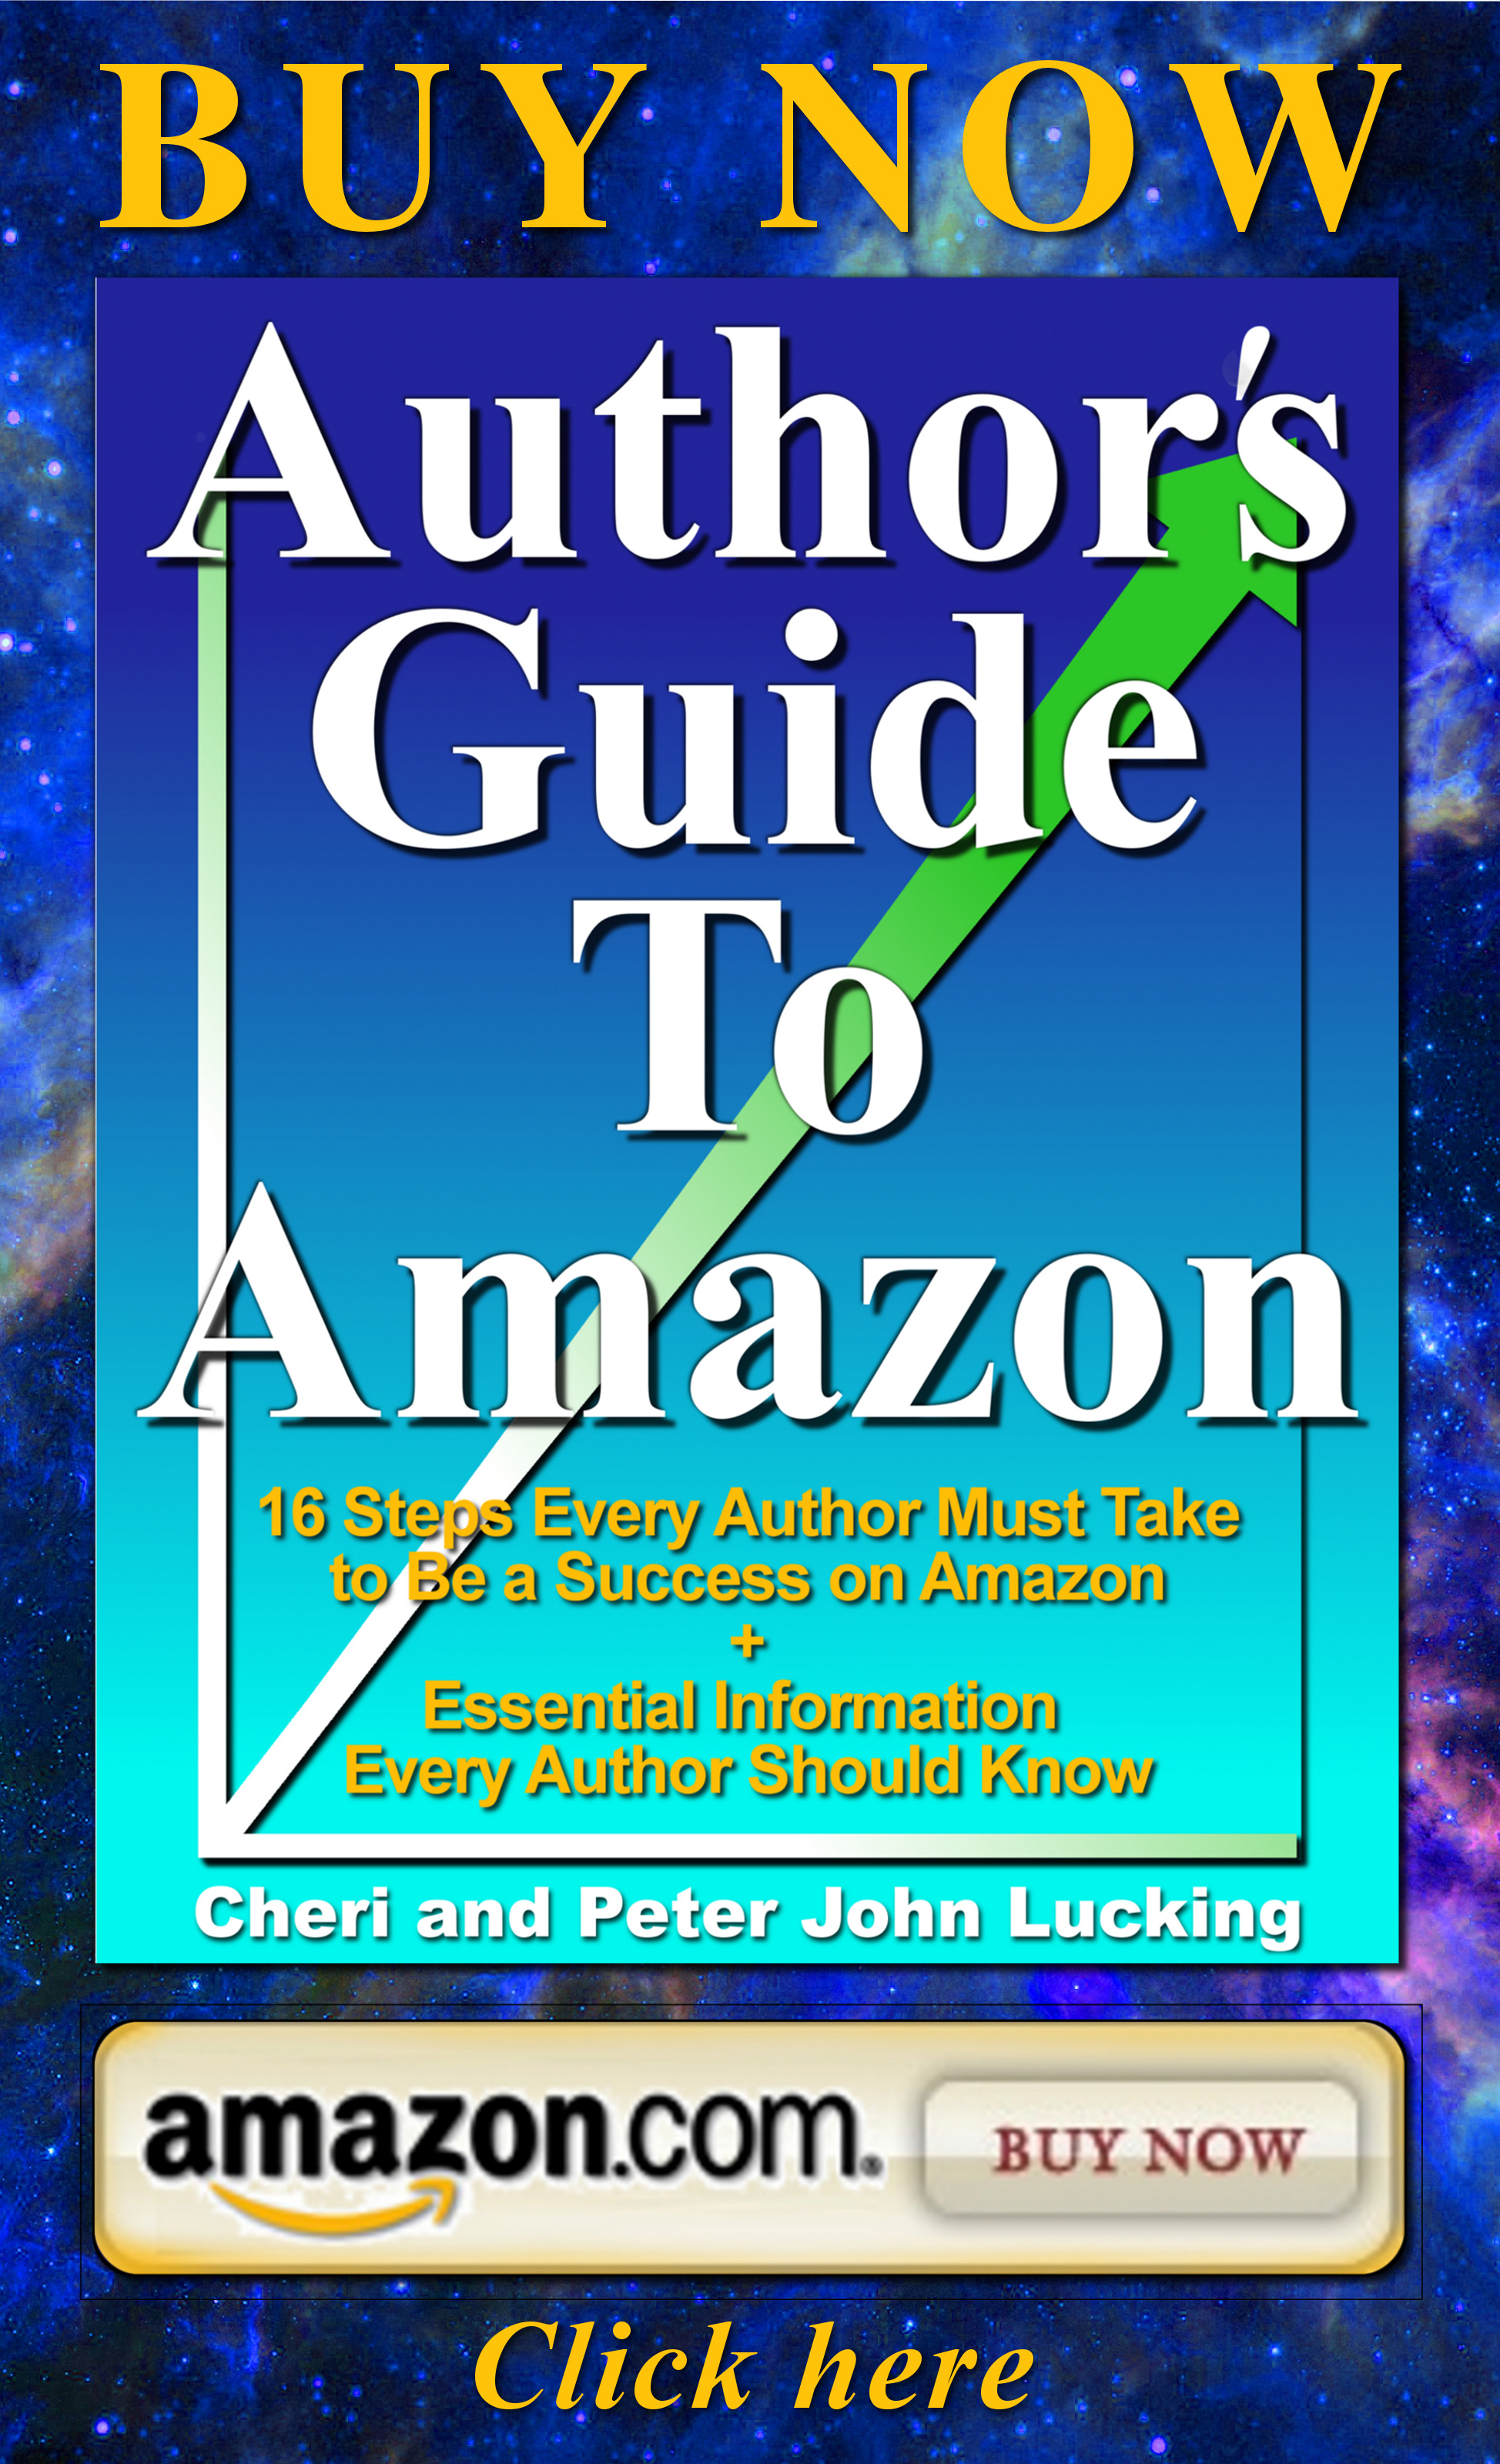 techniques for, publishing books, marketing, sales and selling of books on Amazon by authors